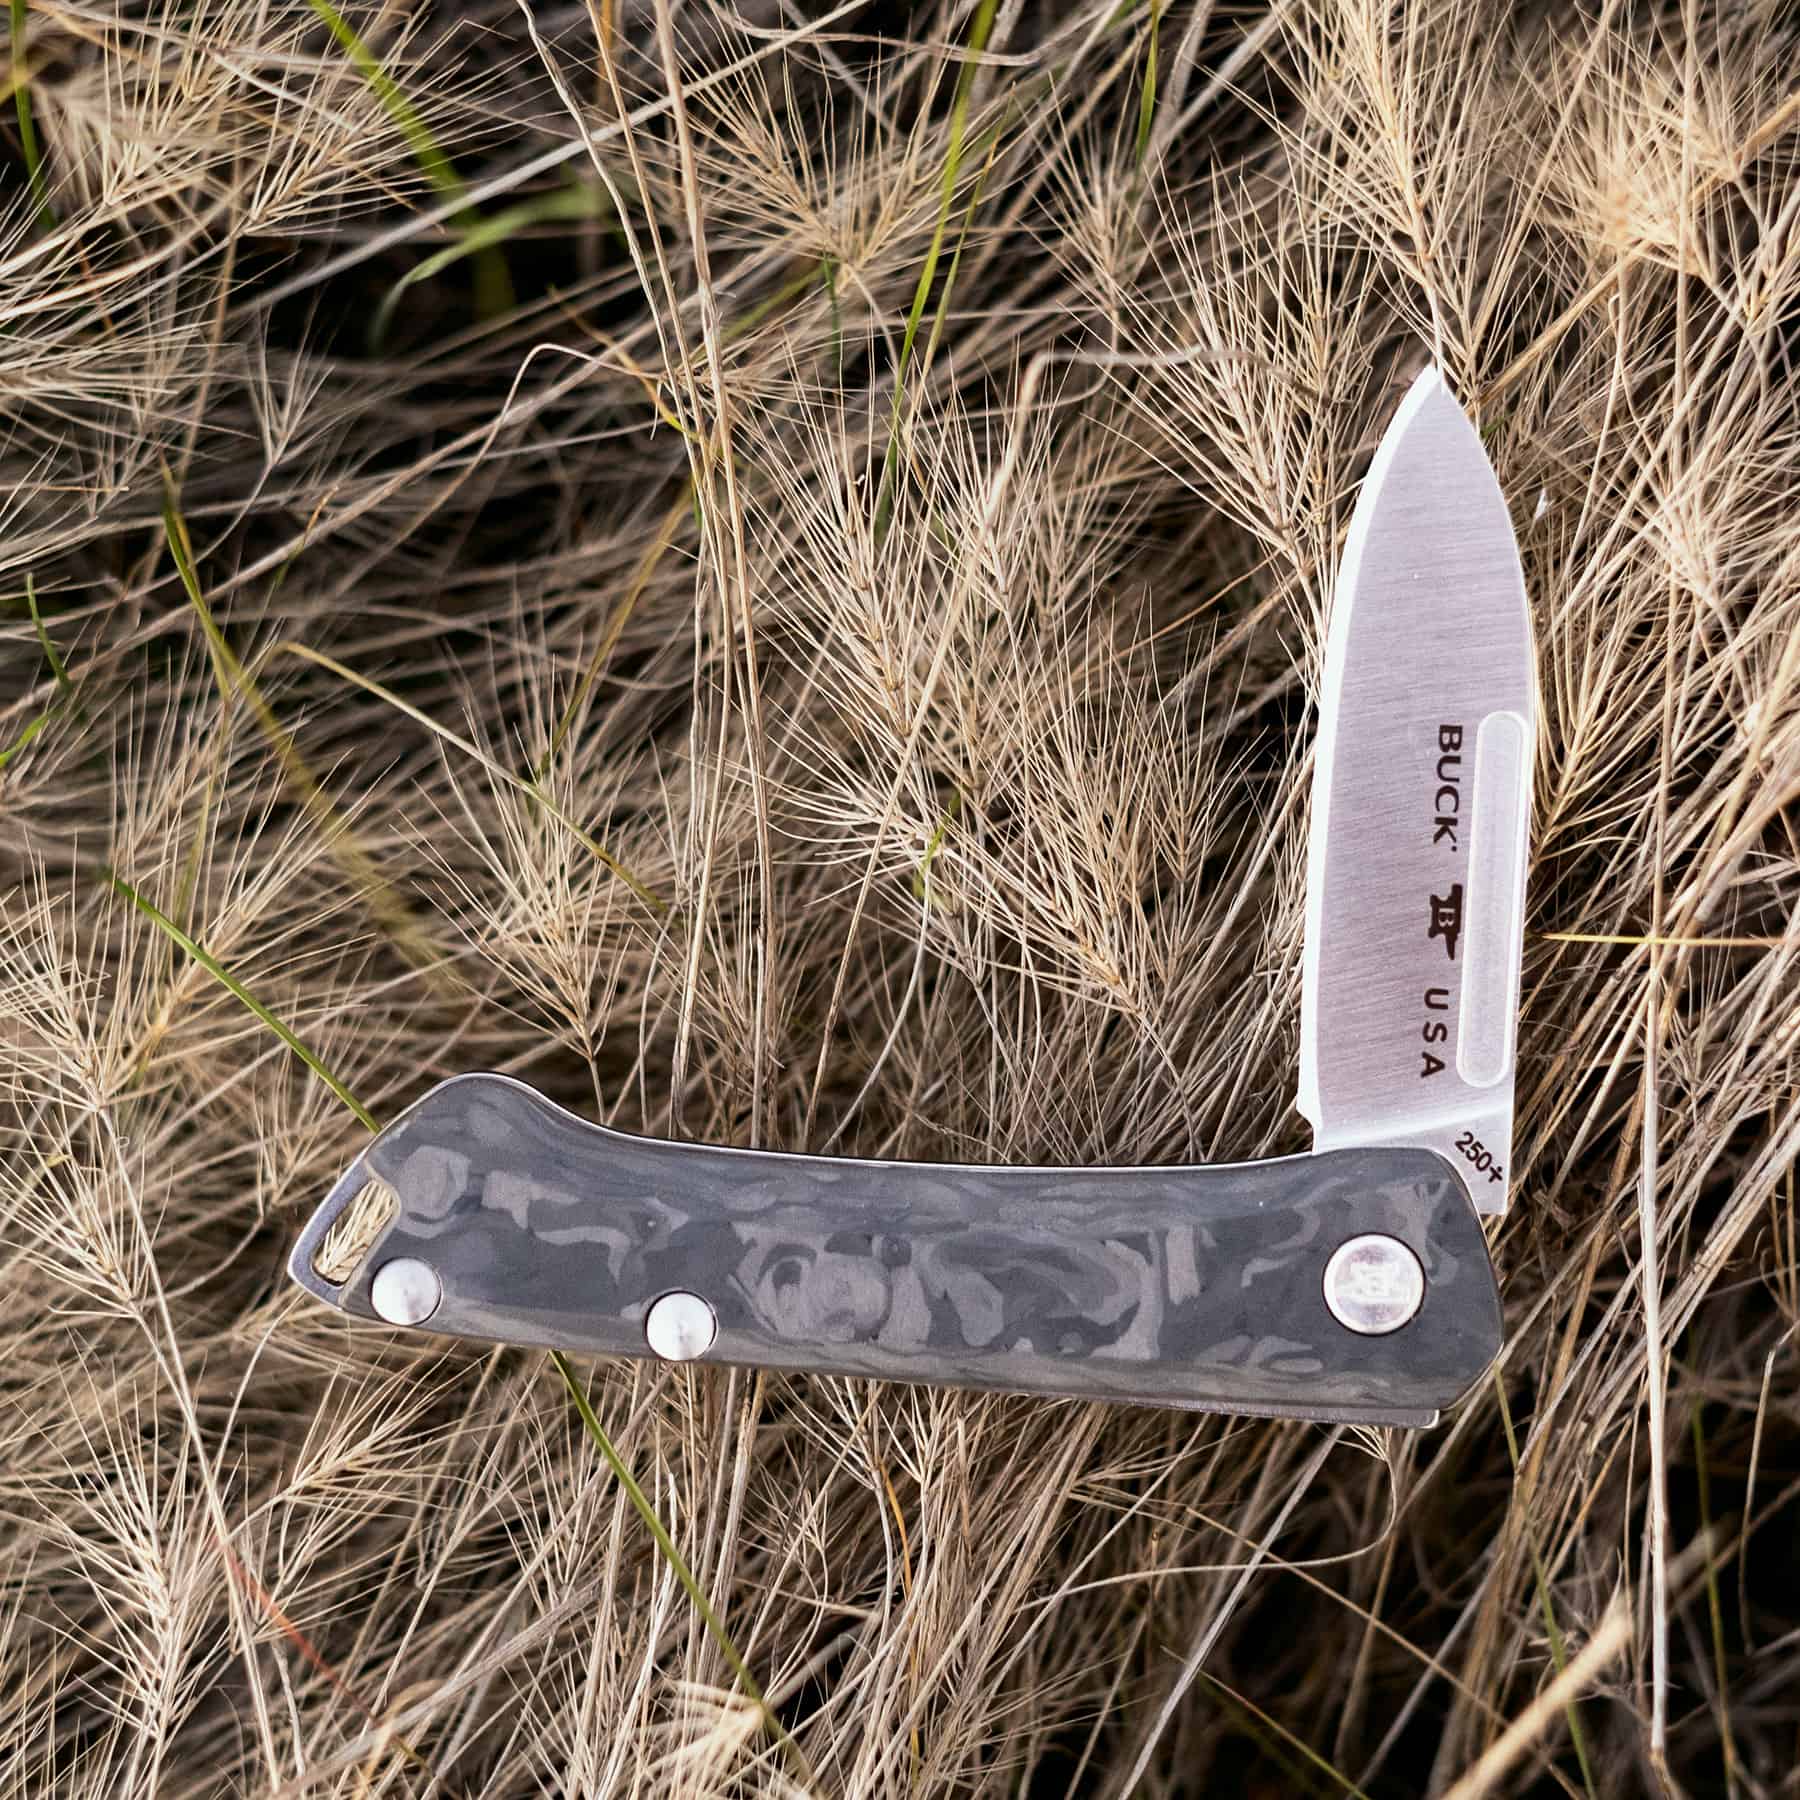 Exploring the outdoors with the Buck Saunter